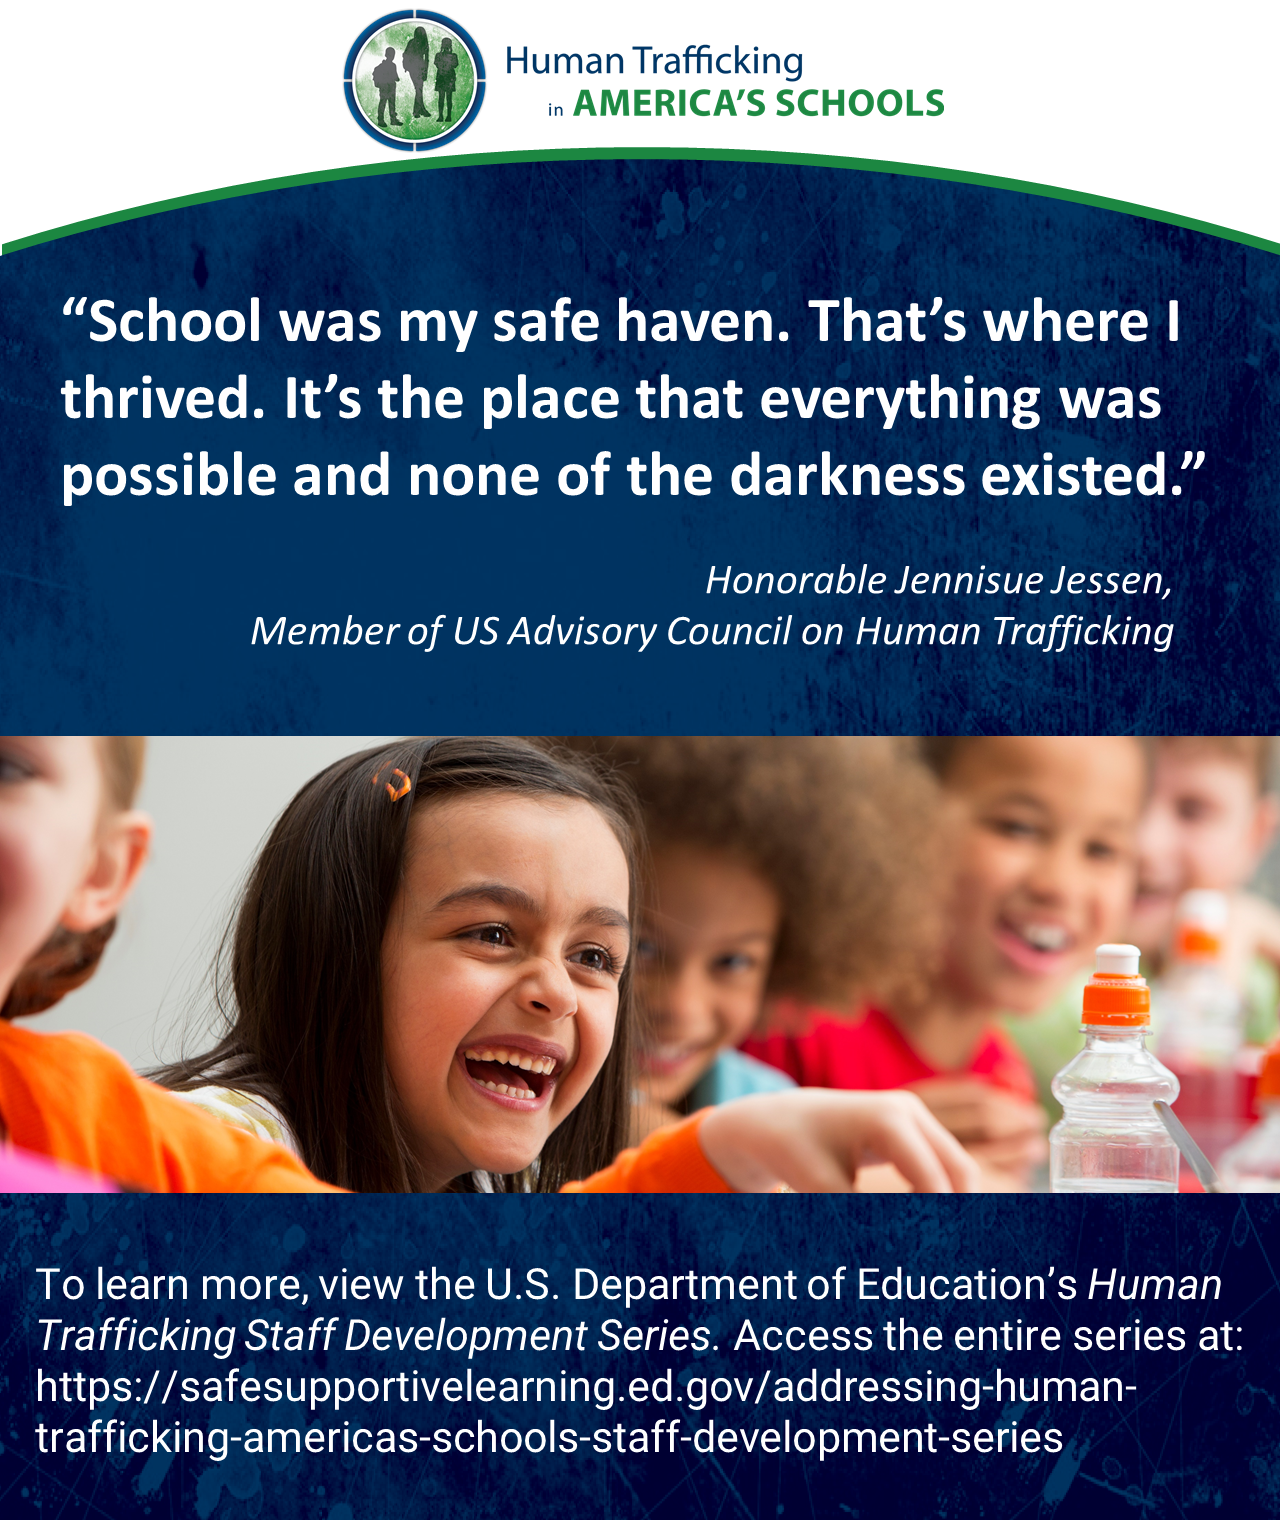 “School was my safe haven. That’s where I thrived. It’s the place that everything was possible and none of the darkness existed.” Honorable Jennisue Jessen, Member of US Advisory Council on Human Trafficking. To learn more, view the U.S. Department of Education’s Human Trafficking Staff Development Series. Access the entire series here.